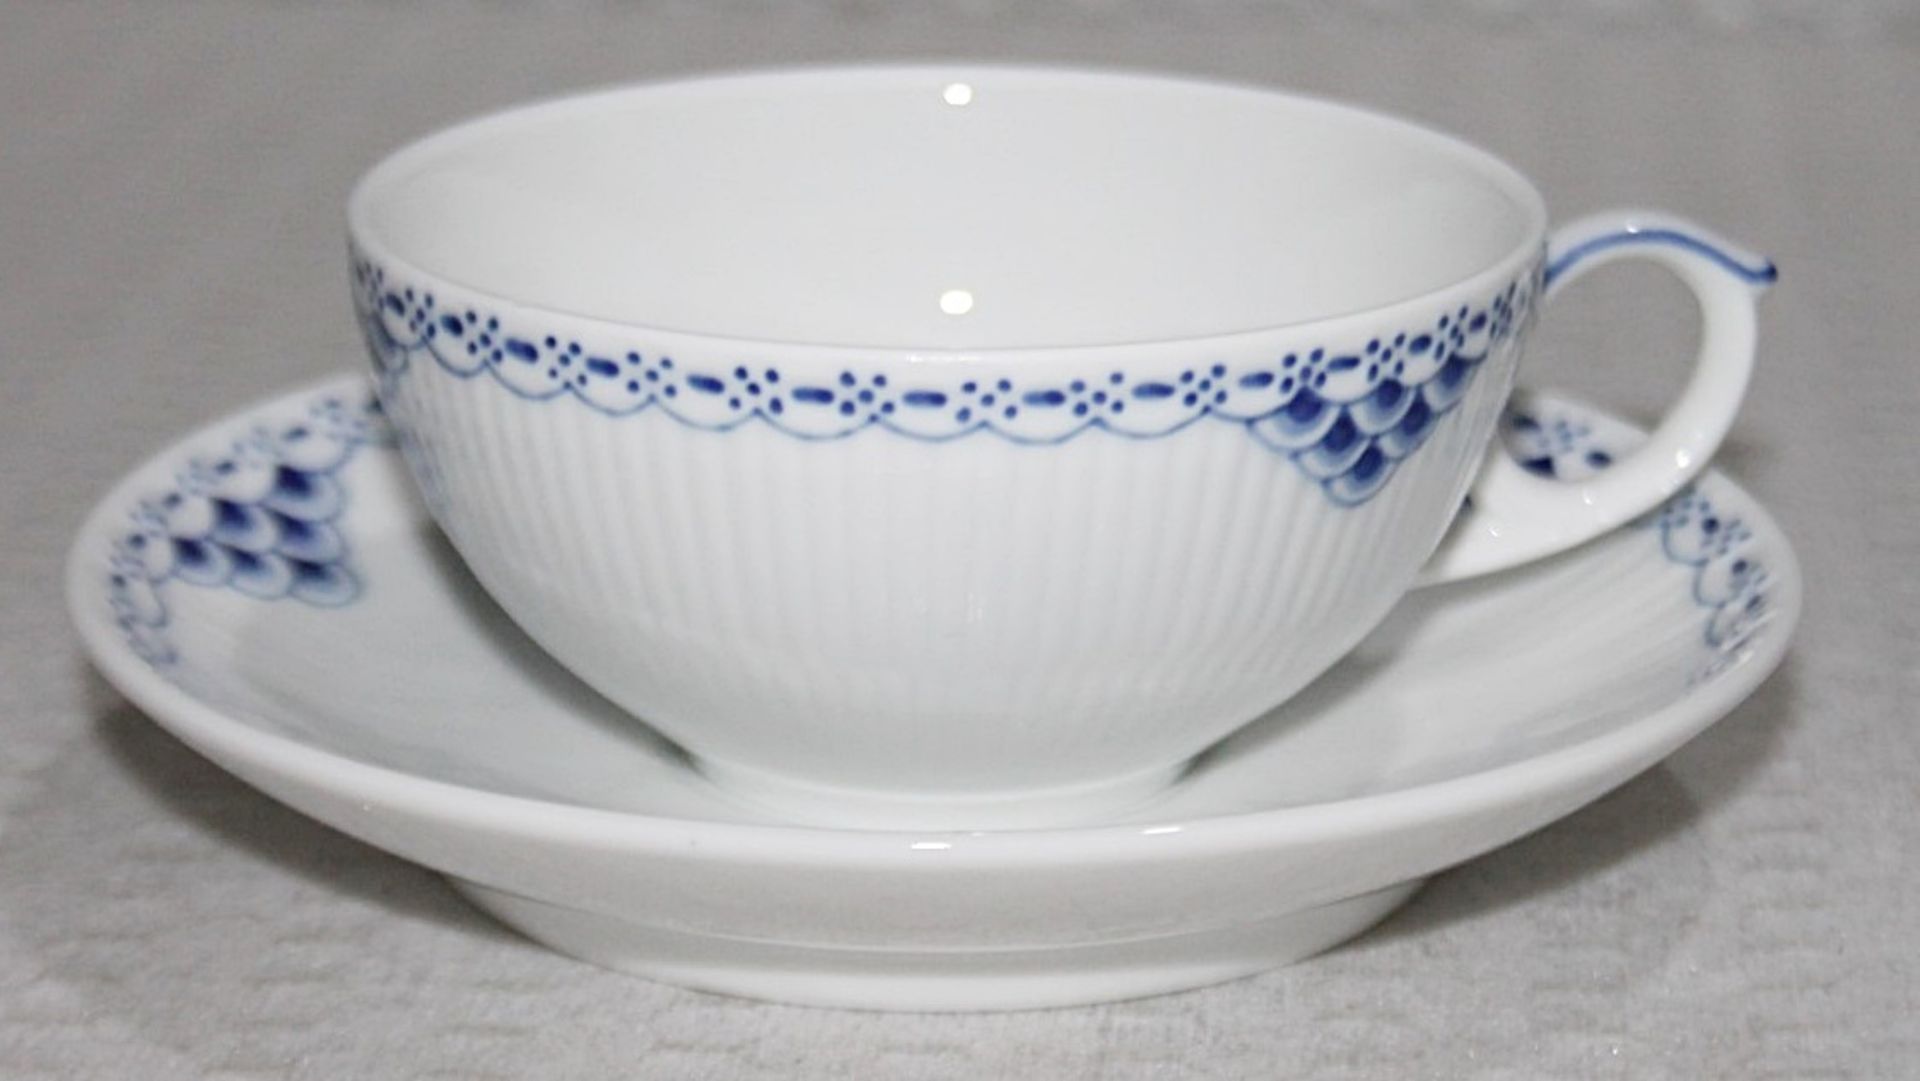 1 x ROYAL COPENHAGEN Princess Teacup and Saucer - Capacity: 200ml - Unused Boxed Stock - Ref: - Image 4 of 10